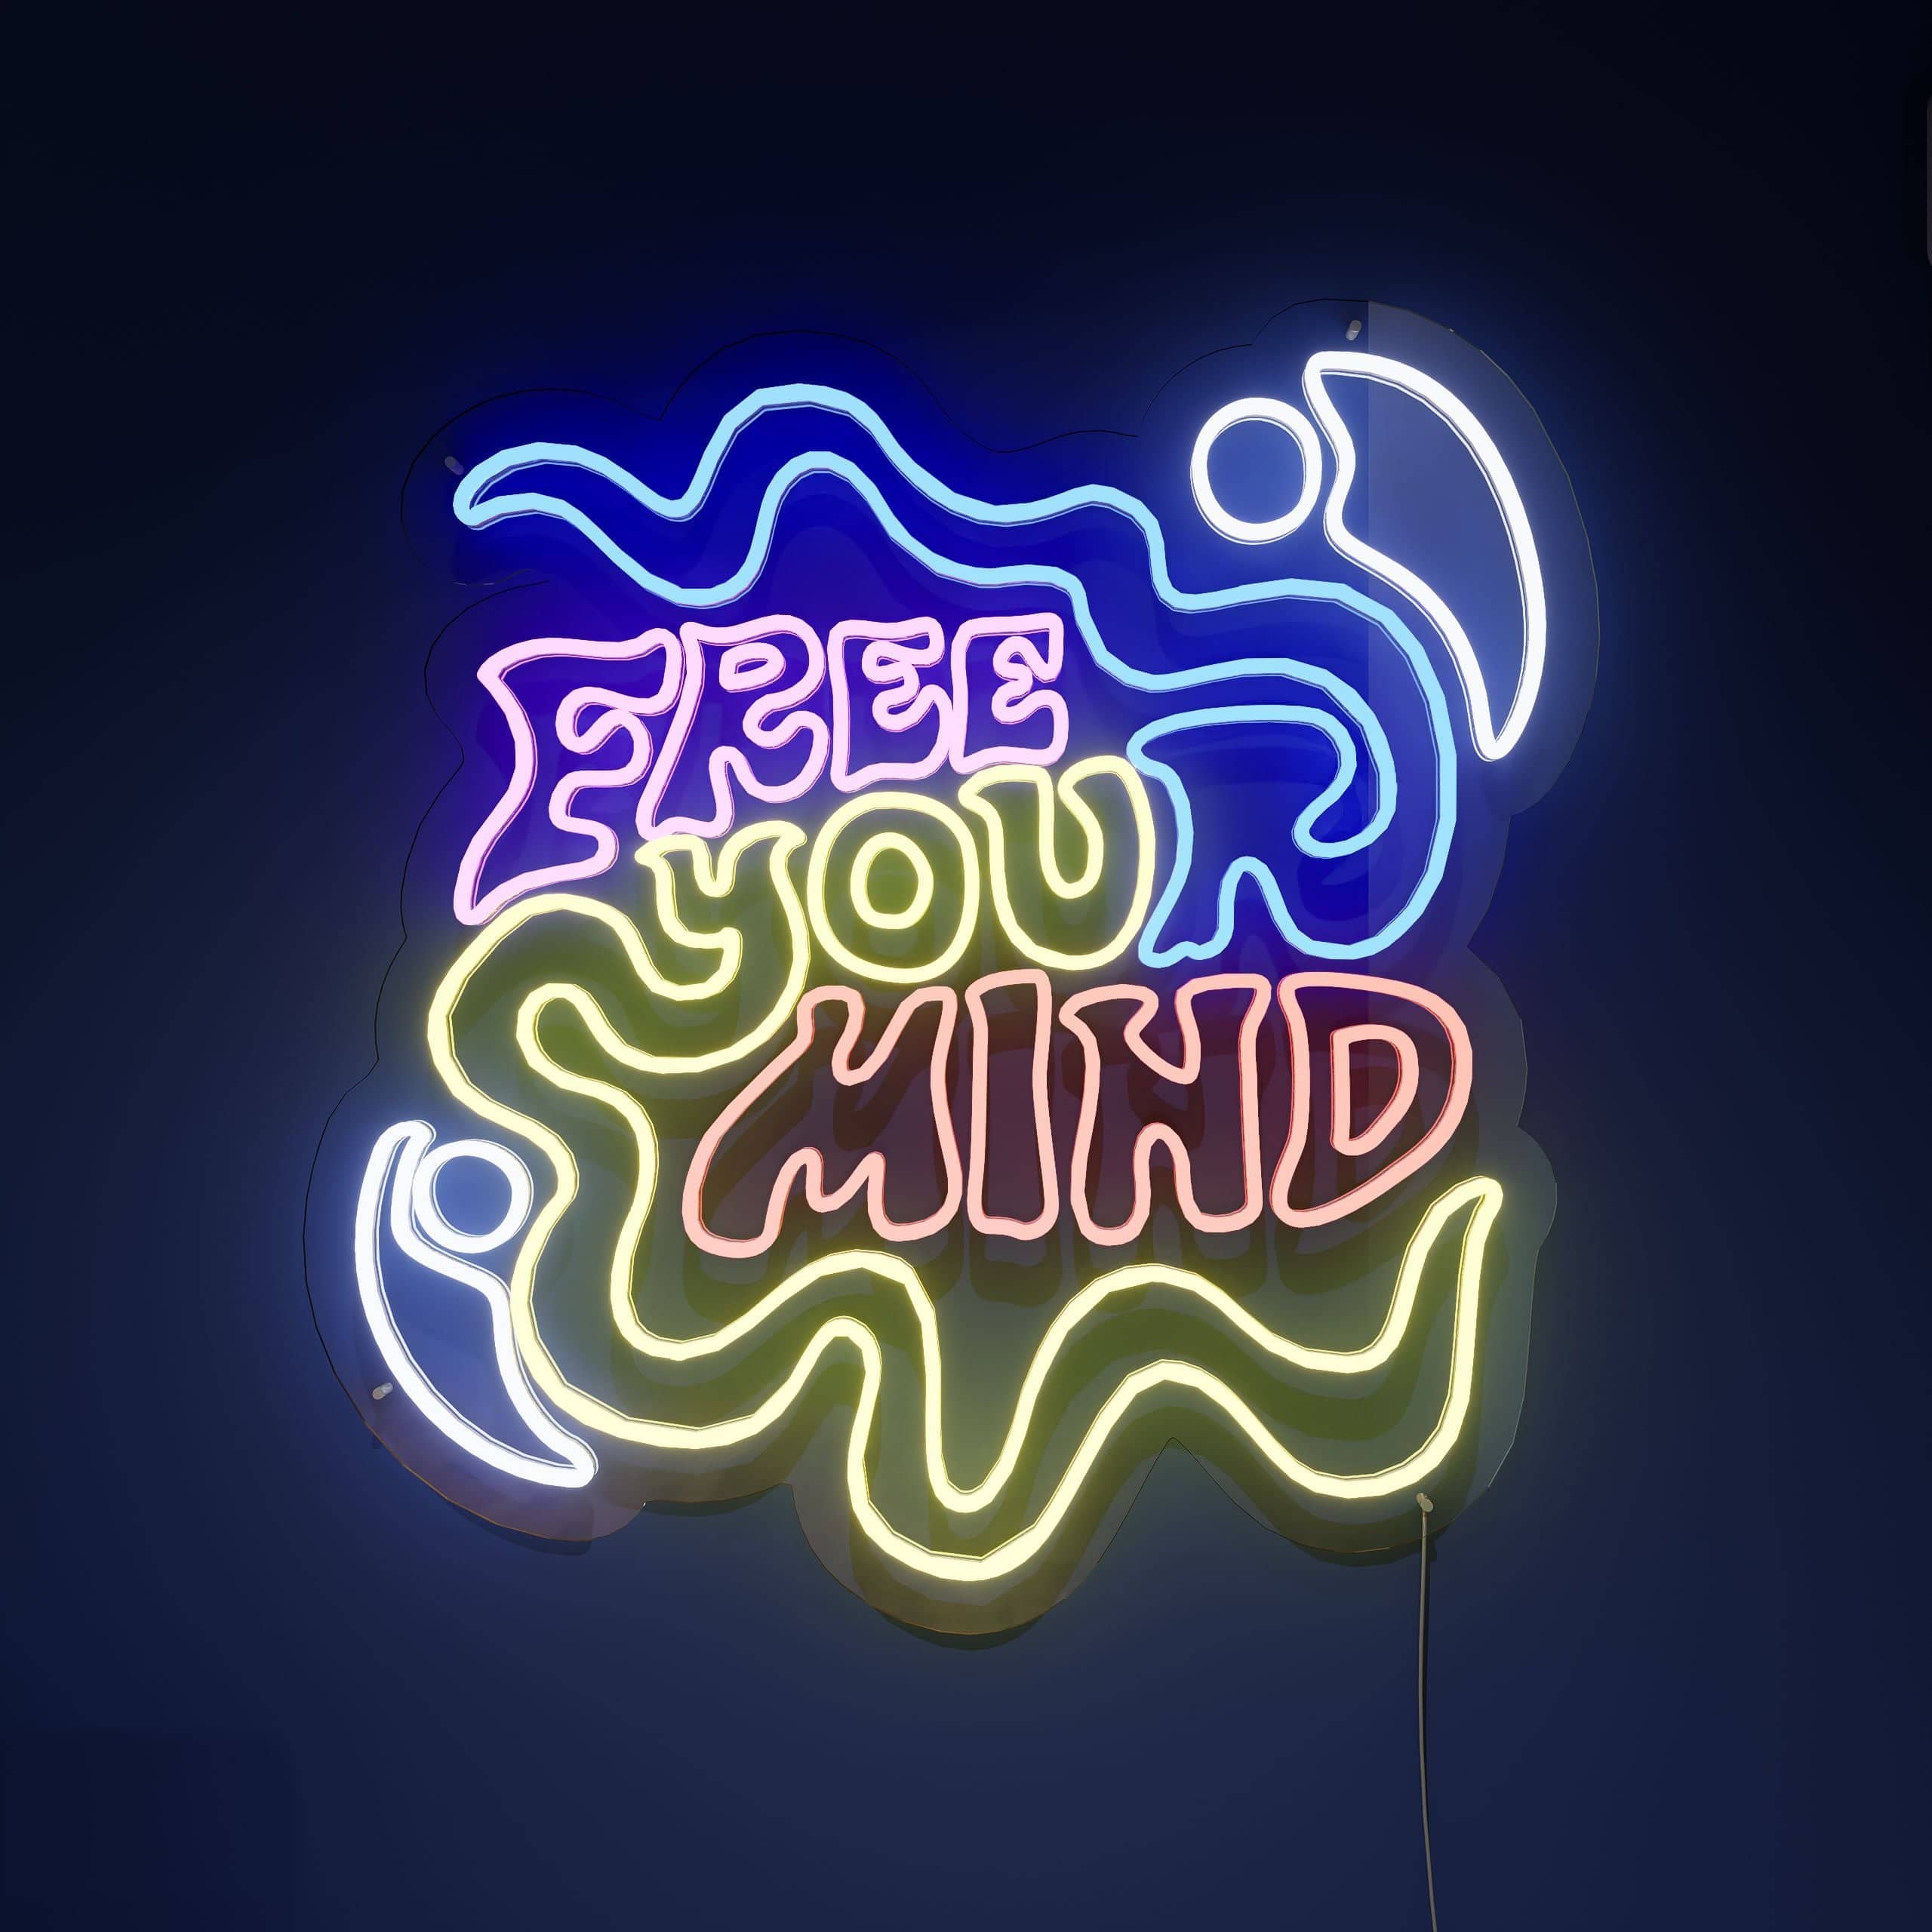 Bright Free You Mind sign lights up spaces